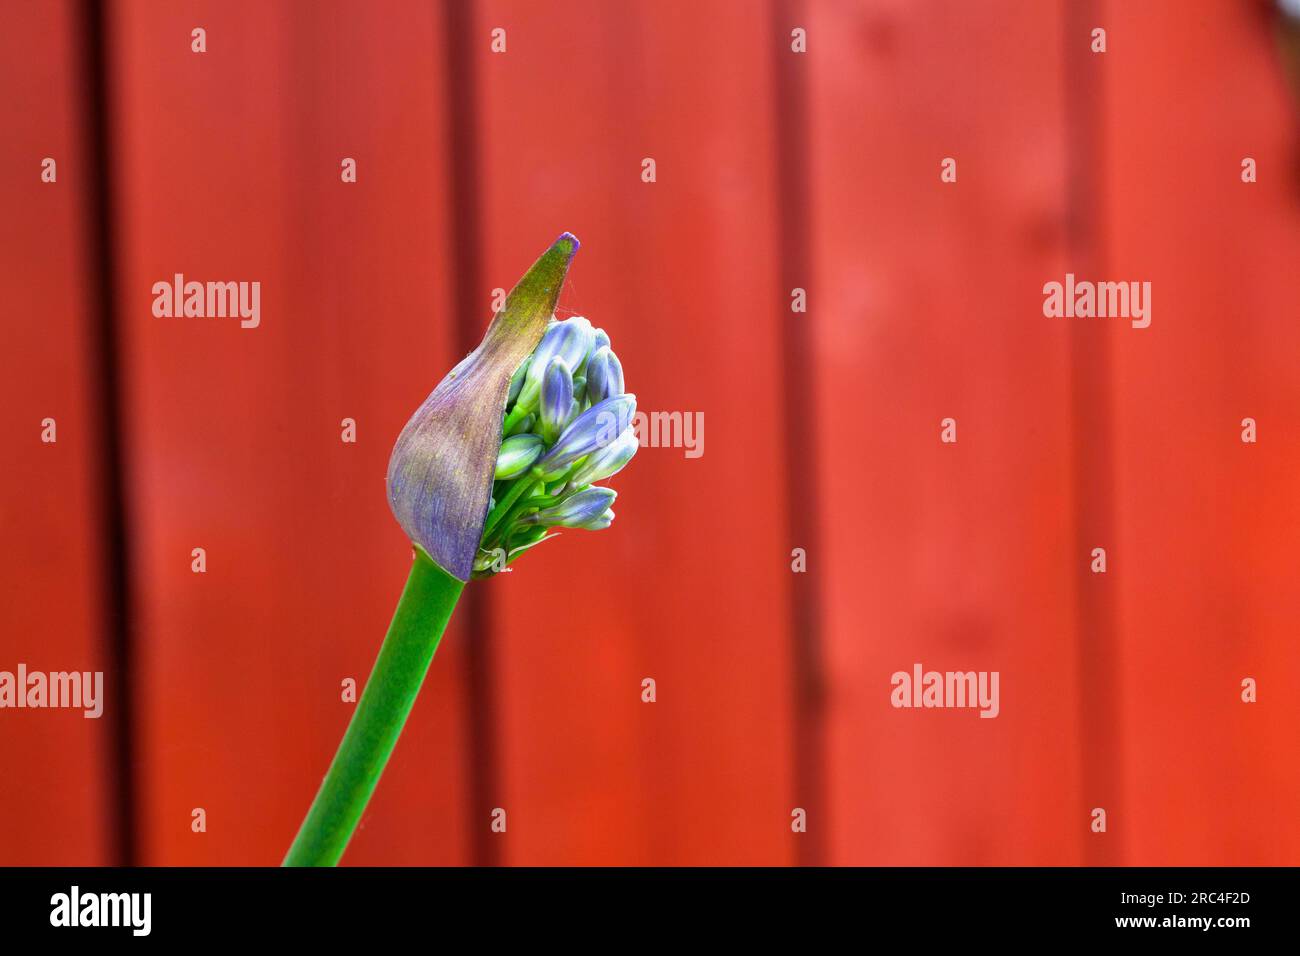 Flora, Flowers, Blue coloured Agapanthus growing outdoor in garden. Agapanthus Stock Photo